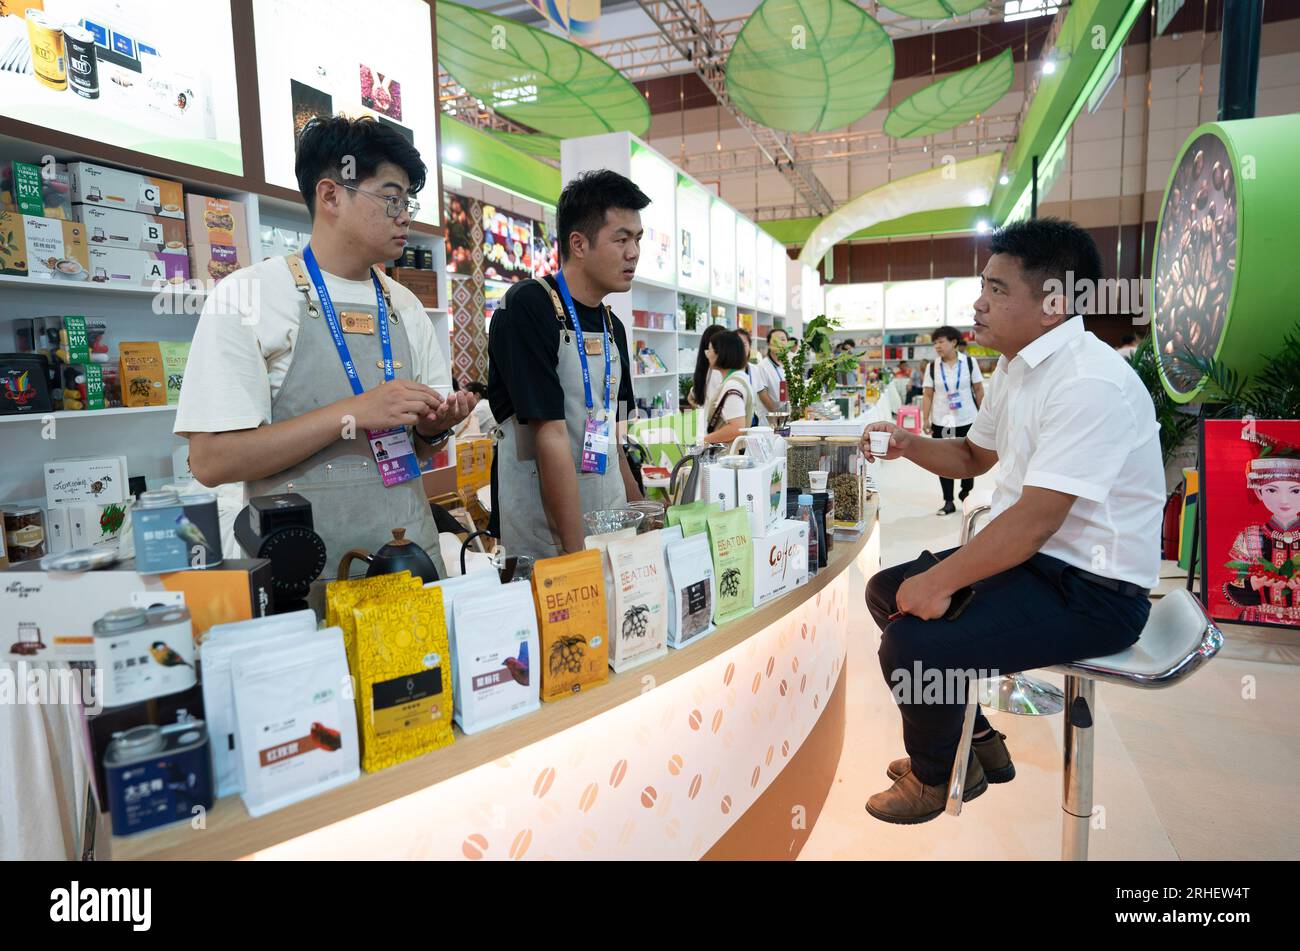 KUNMING, Aug. 16, 2023 (Xinhua) -- Exhibitors introduce coffee products at the seventh China-South Asia Expo in Kunming, southwest China's Yunnan Province, Aug. 16, 2023. The seventh China-South Asia Expo kicked off Wednesday in Kunming. More than 30,000 exhibitors, representatives and guests from 85 countries and regions, and international organizations, are expected to attend both online and offline activities during the five-day expo. The expo, themed 'Solidarity and Coordination for Common Development,' has set up 15 exhibition halls featuring diverse themes including Sout Stock Photo